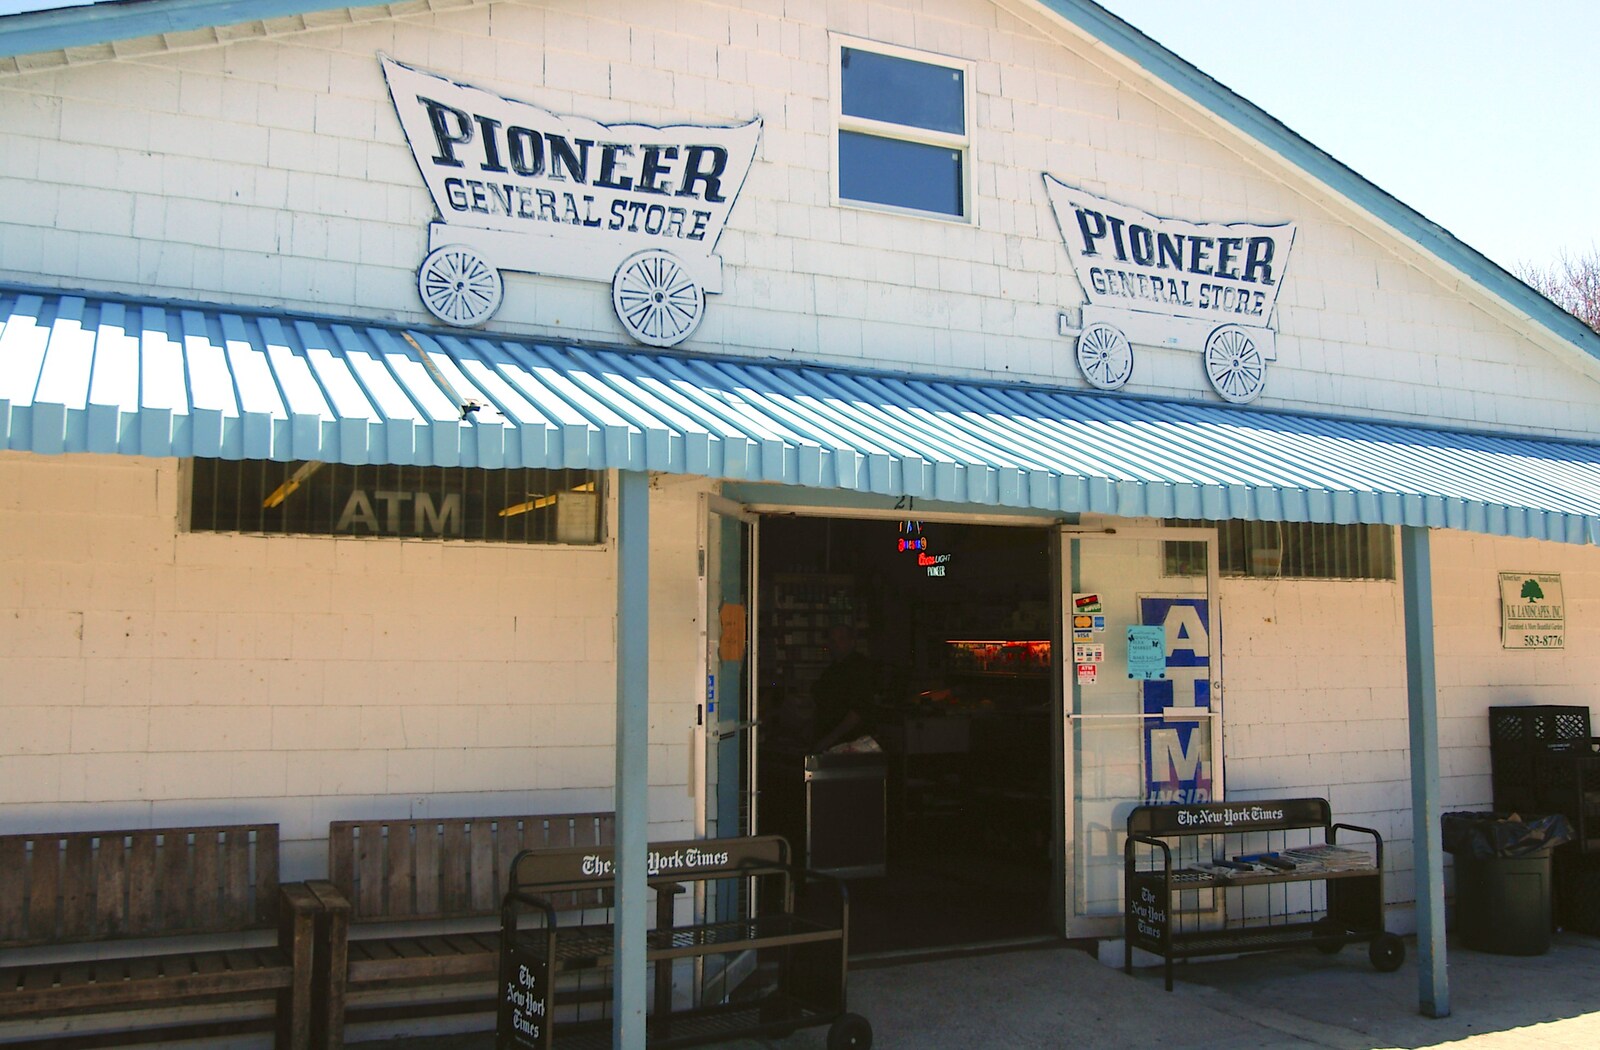 The Pioneer General Store from Phil and the Fair Harbor Fire Engine, Fire Island, New York State, US - 30th April 2006